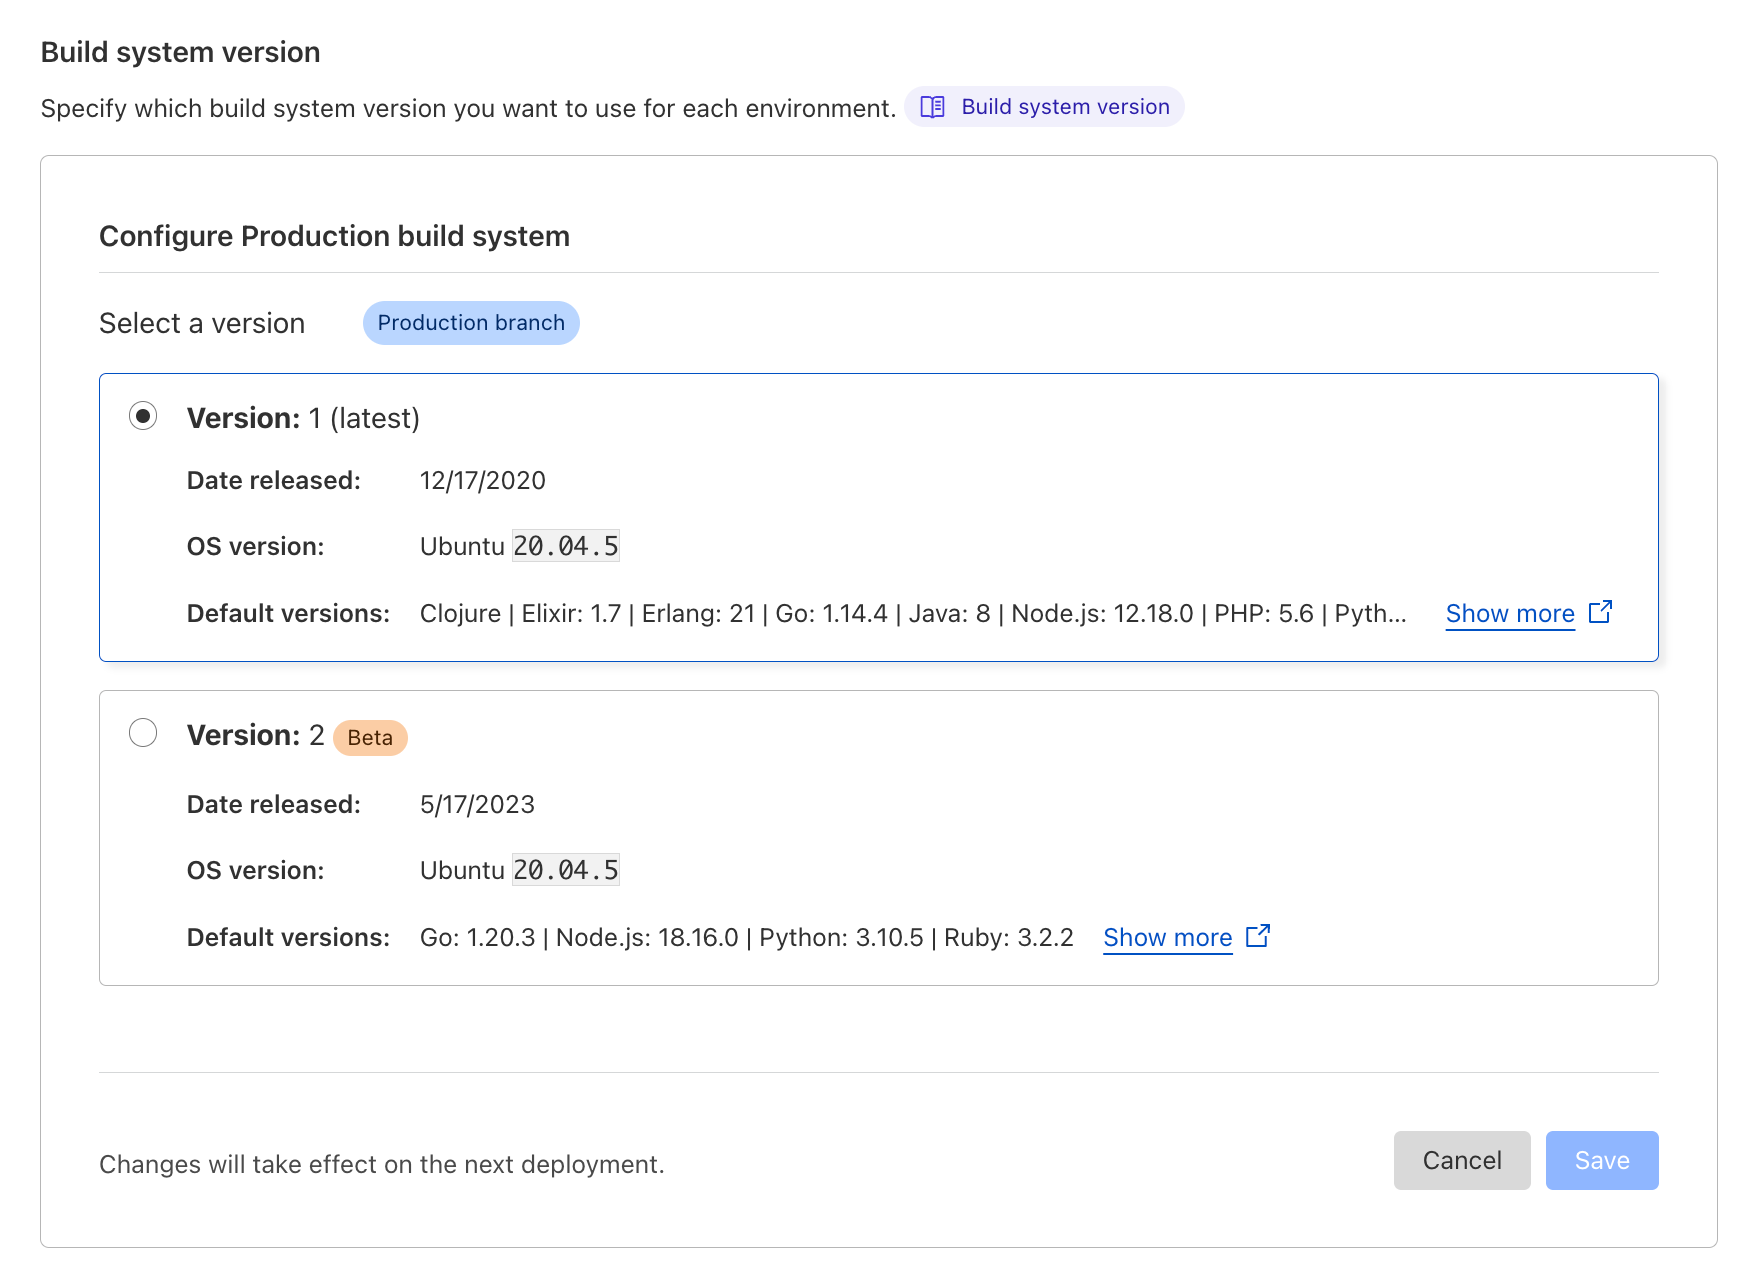 Screenshot of the Cloudflare dashboard Pages project settings screen where you can configure the build system version.